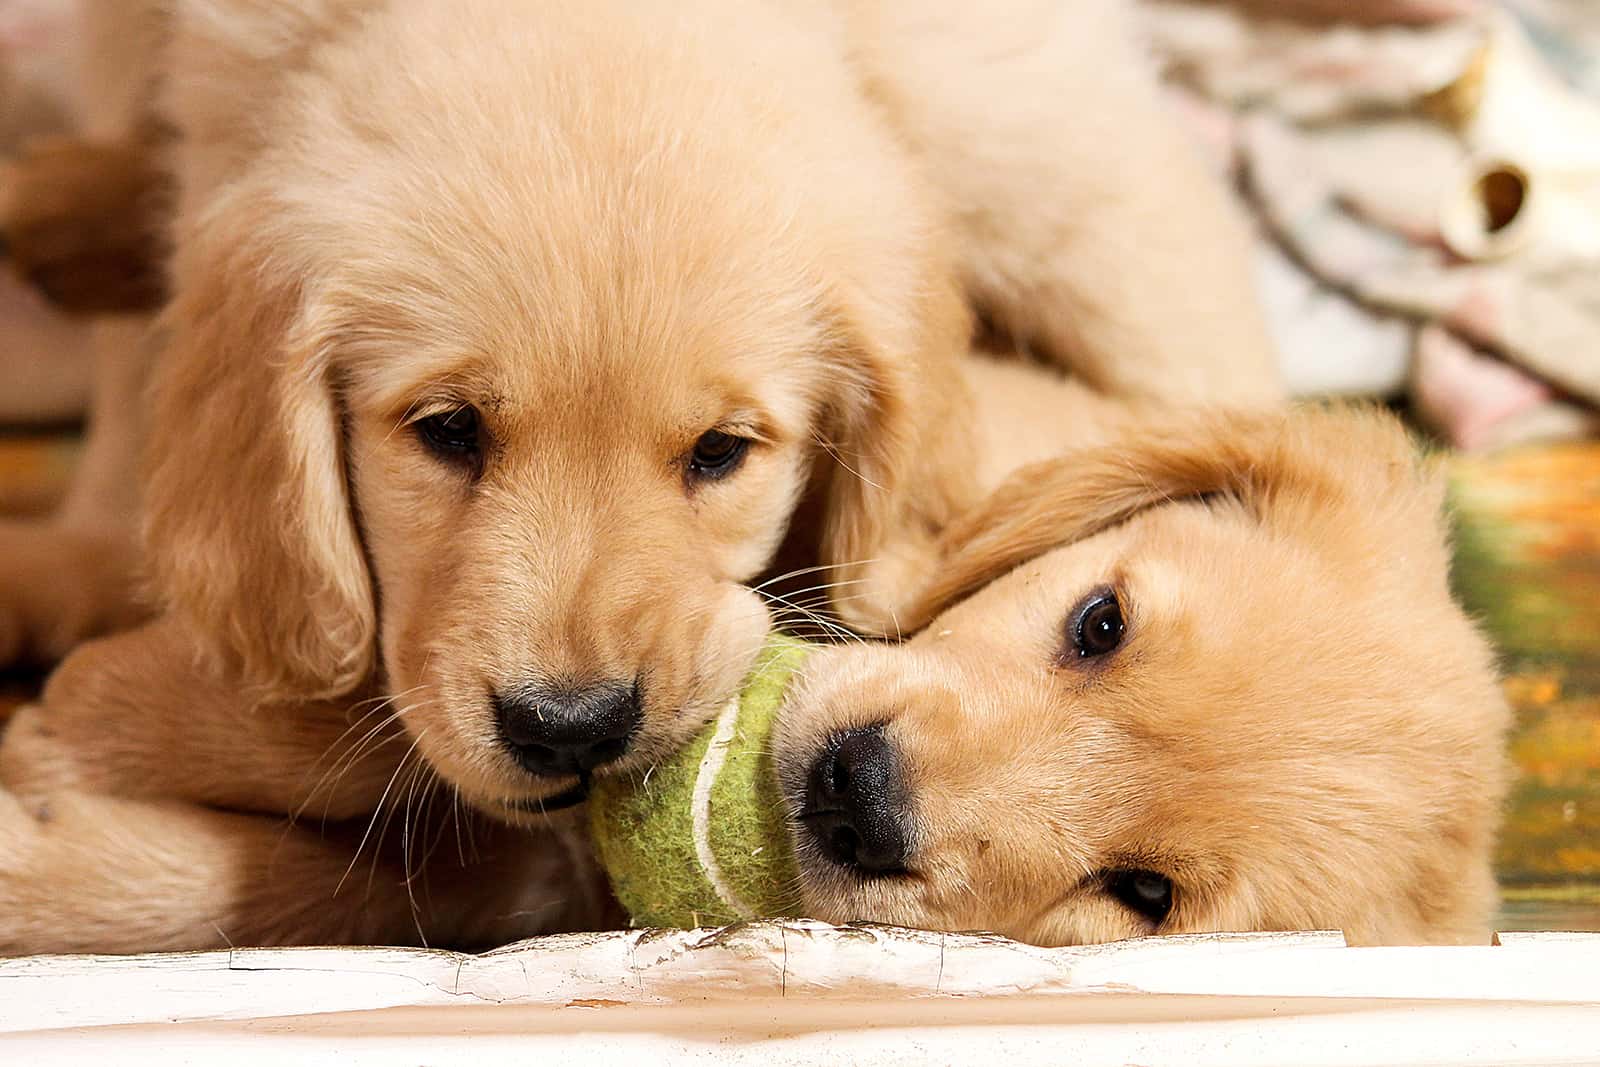 cute golden retriever puppies playing with a tennis ball